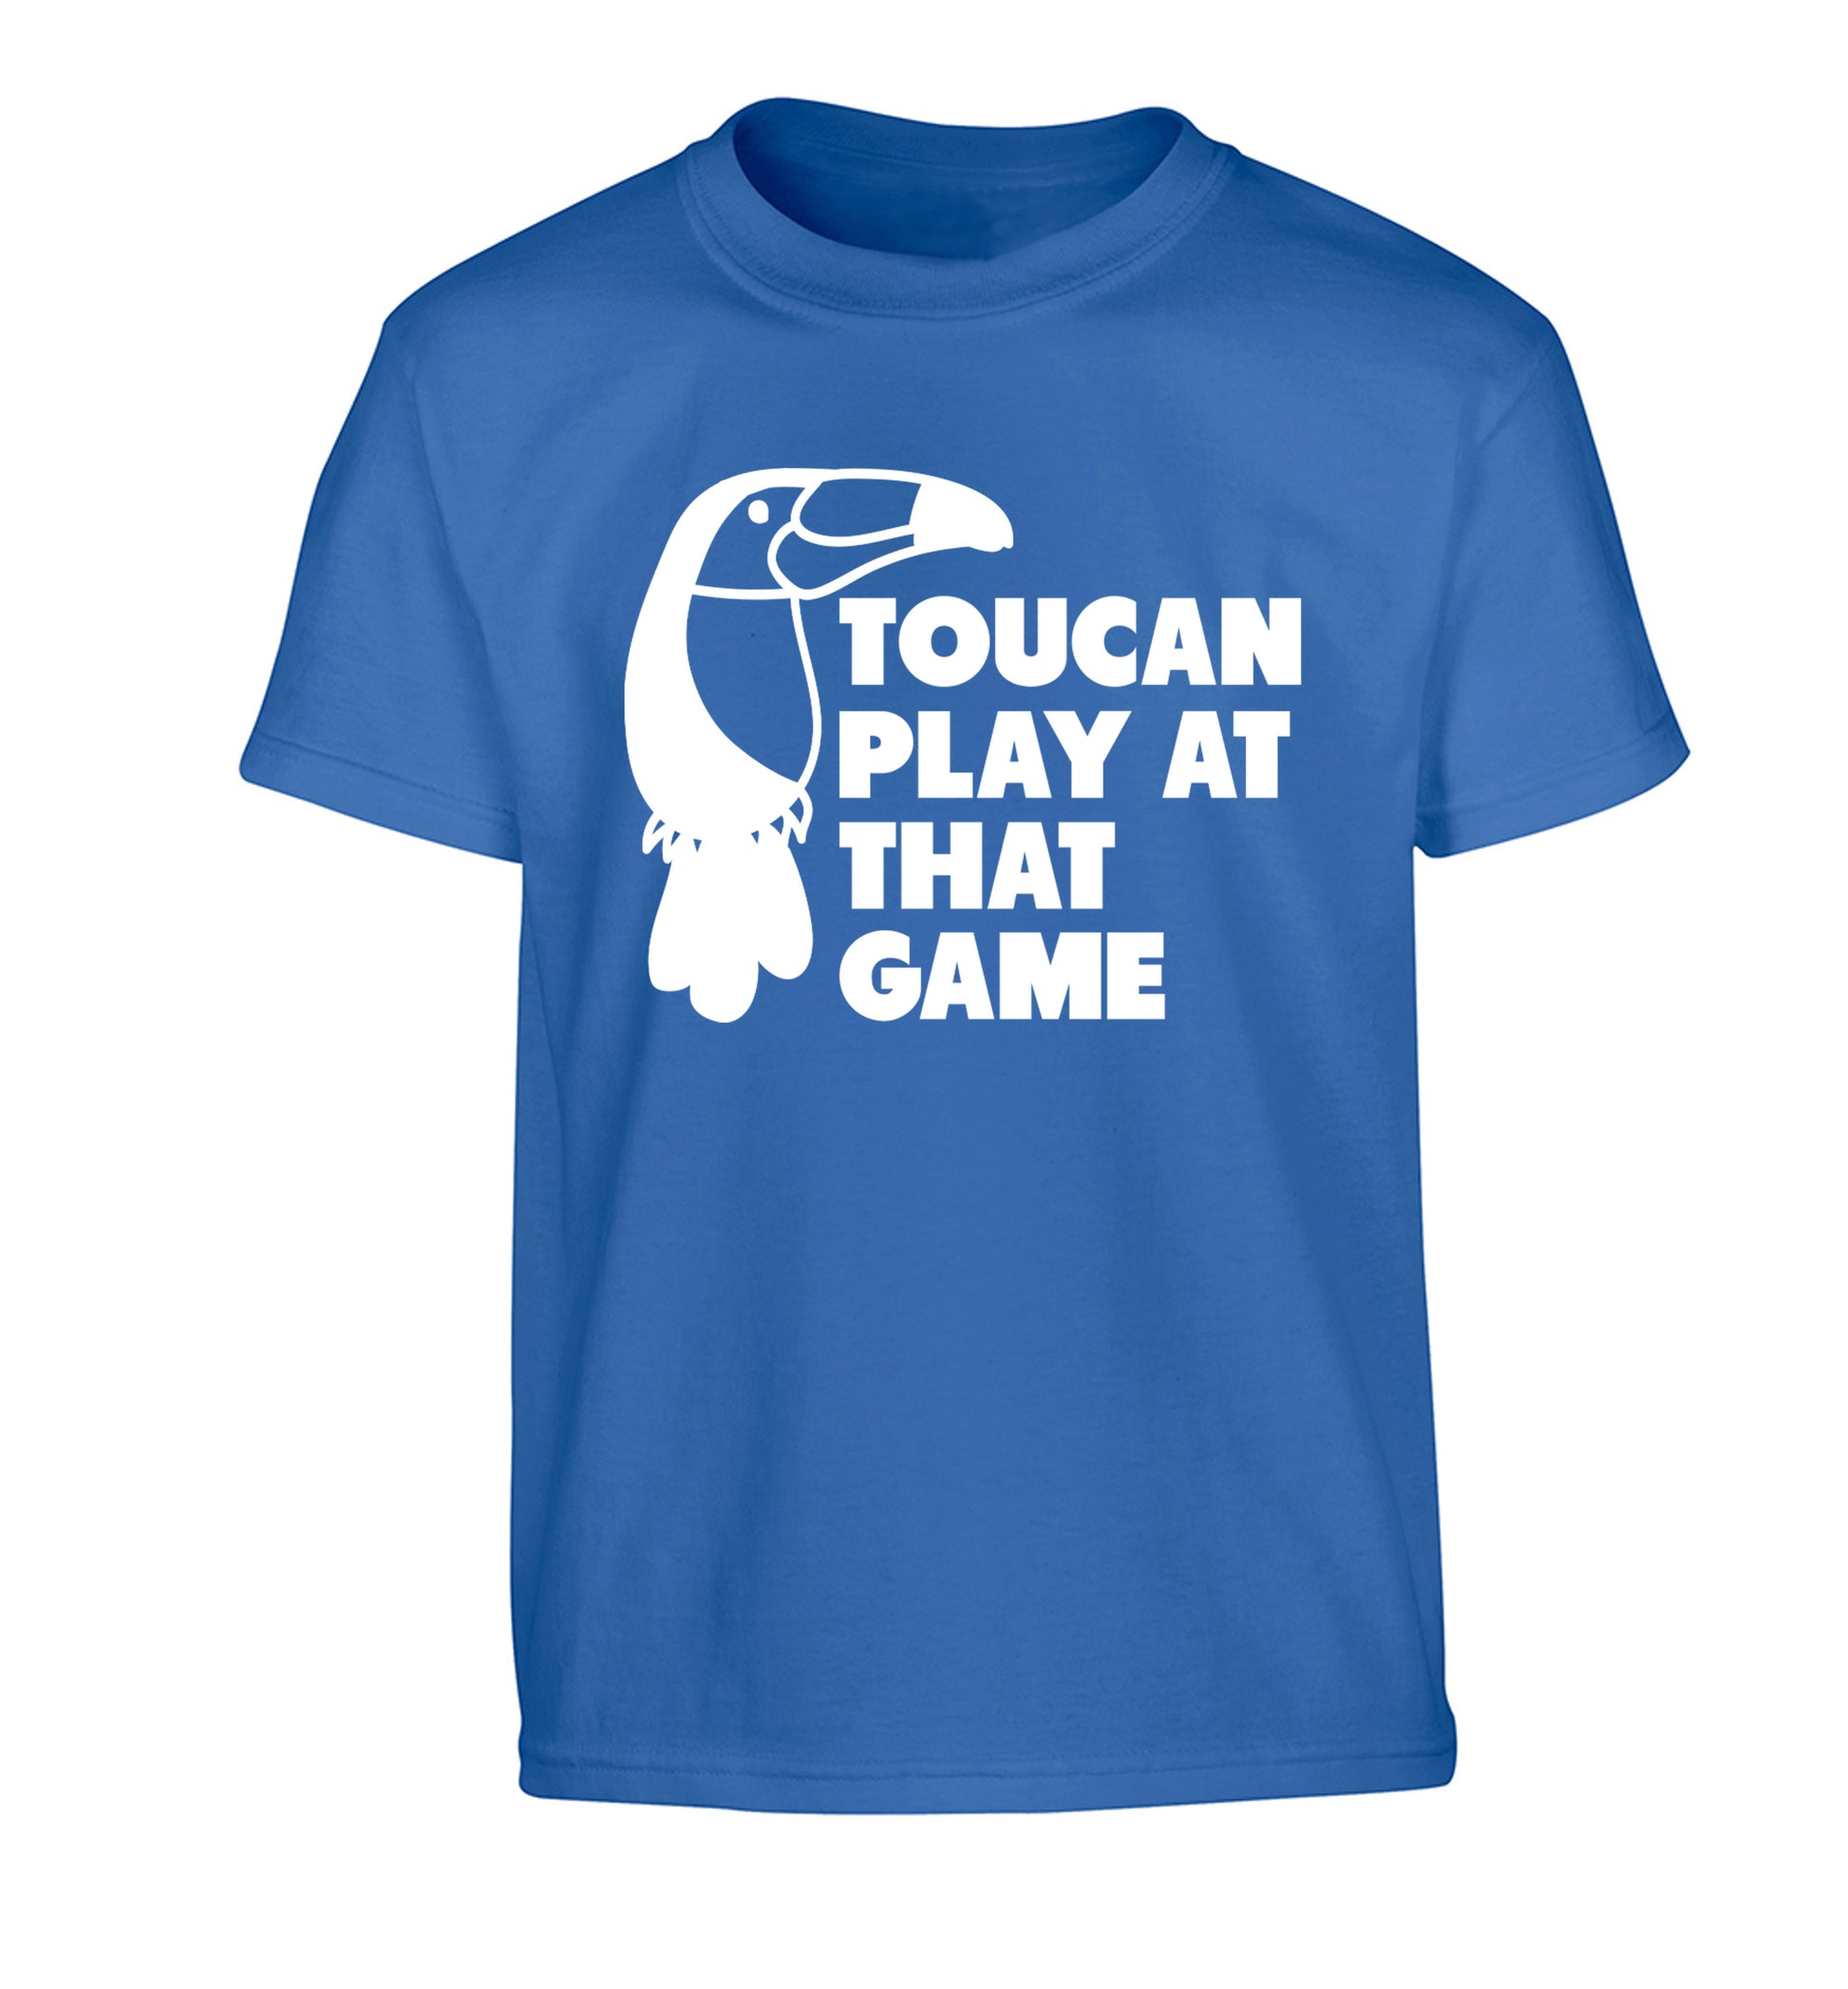 Toucan play at that game Children's blue Tshirt 12-13 Years